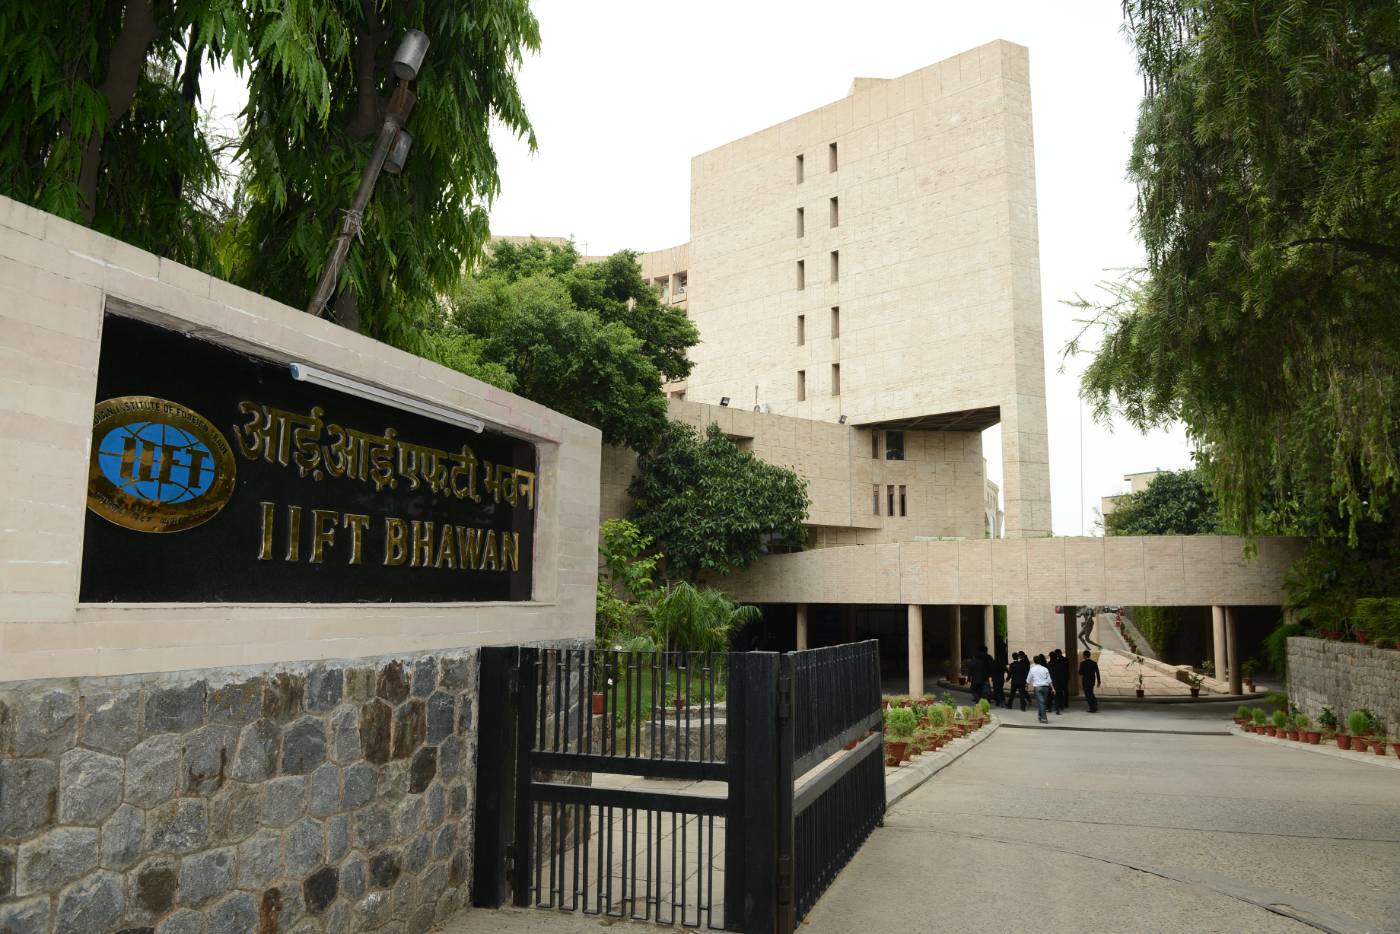 Indian Institute of Foreign Trade (IIFT), New Delhi